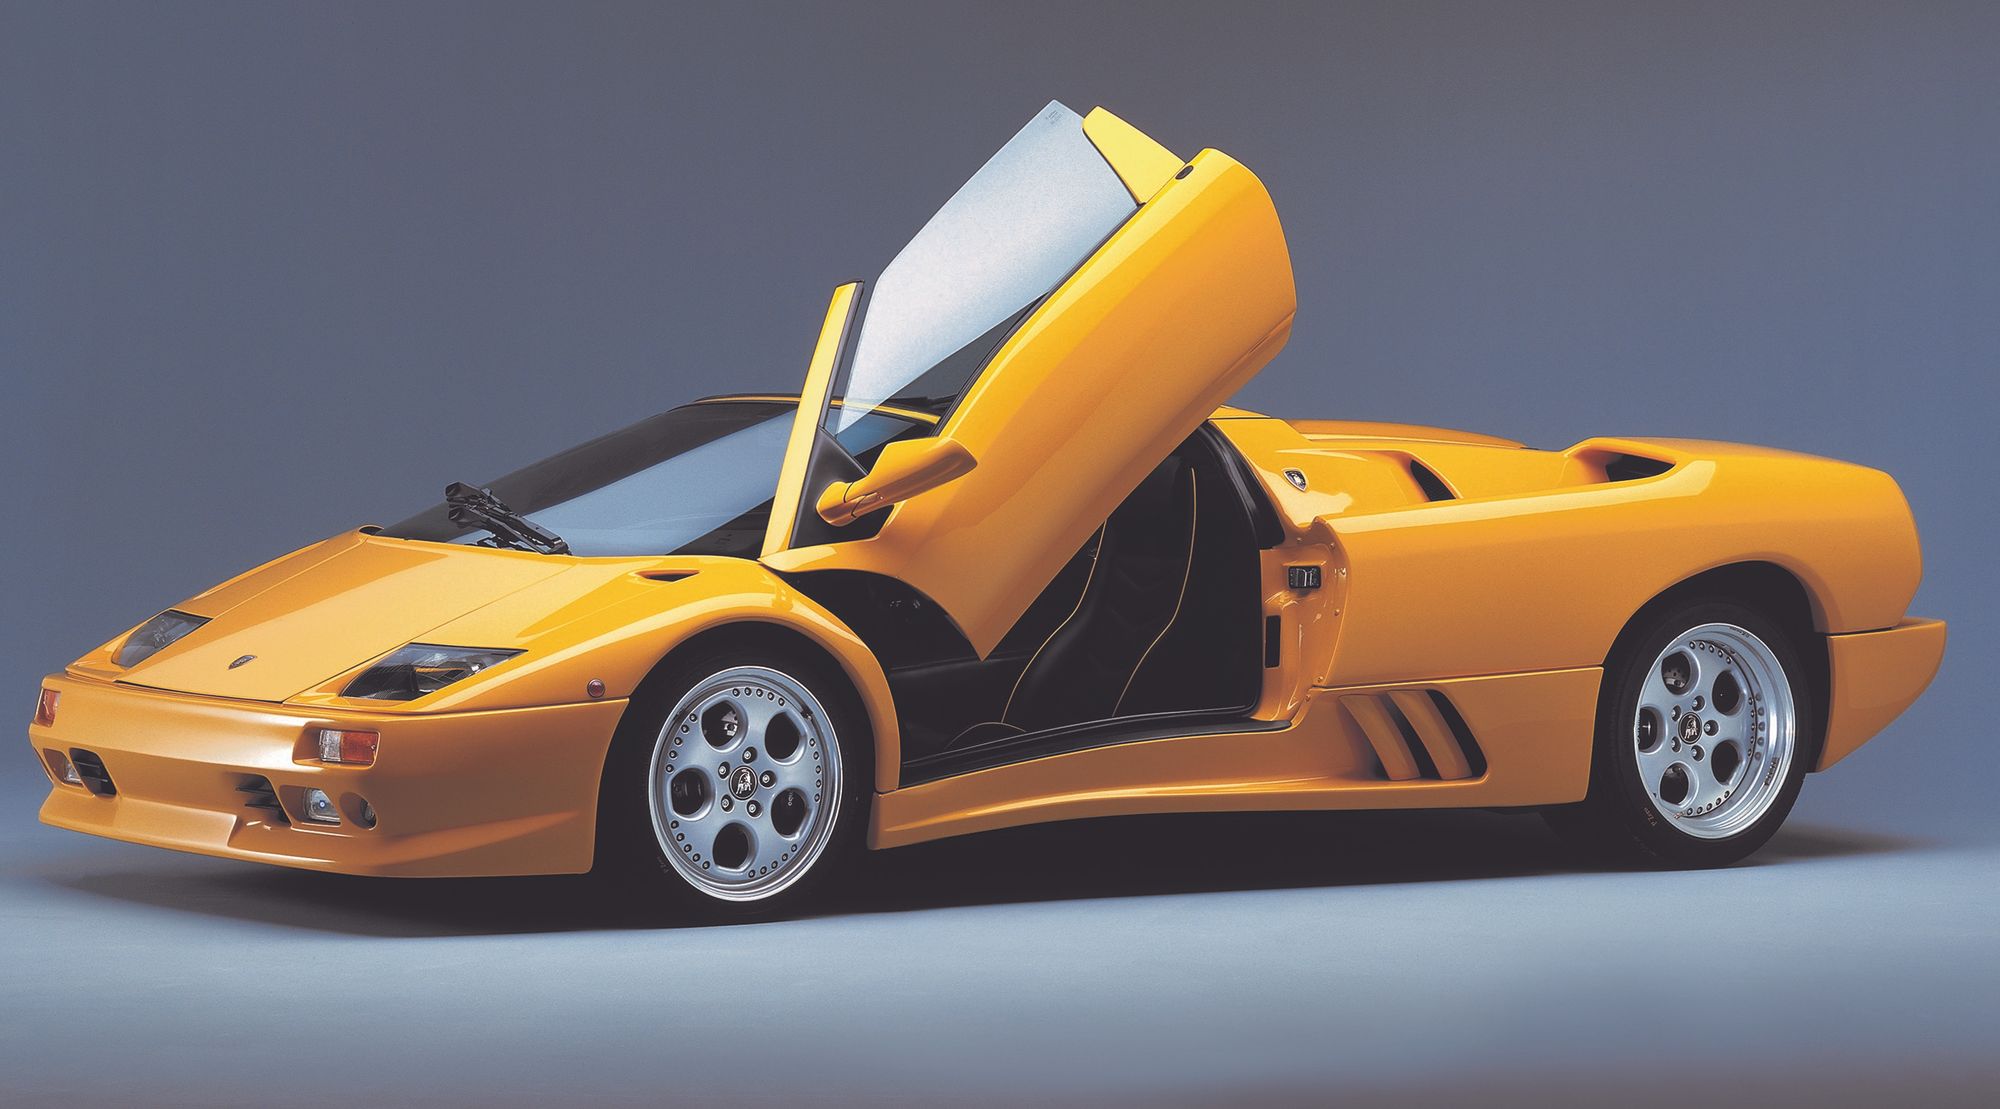 Maxim Recognizes Classic Supercars Are A Great Investment